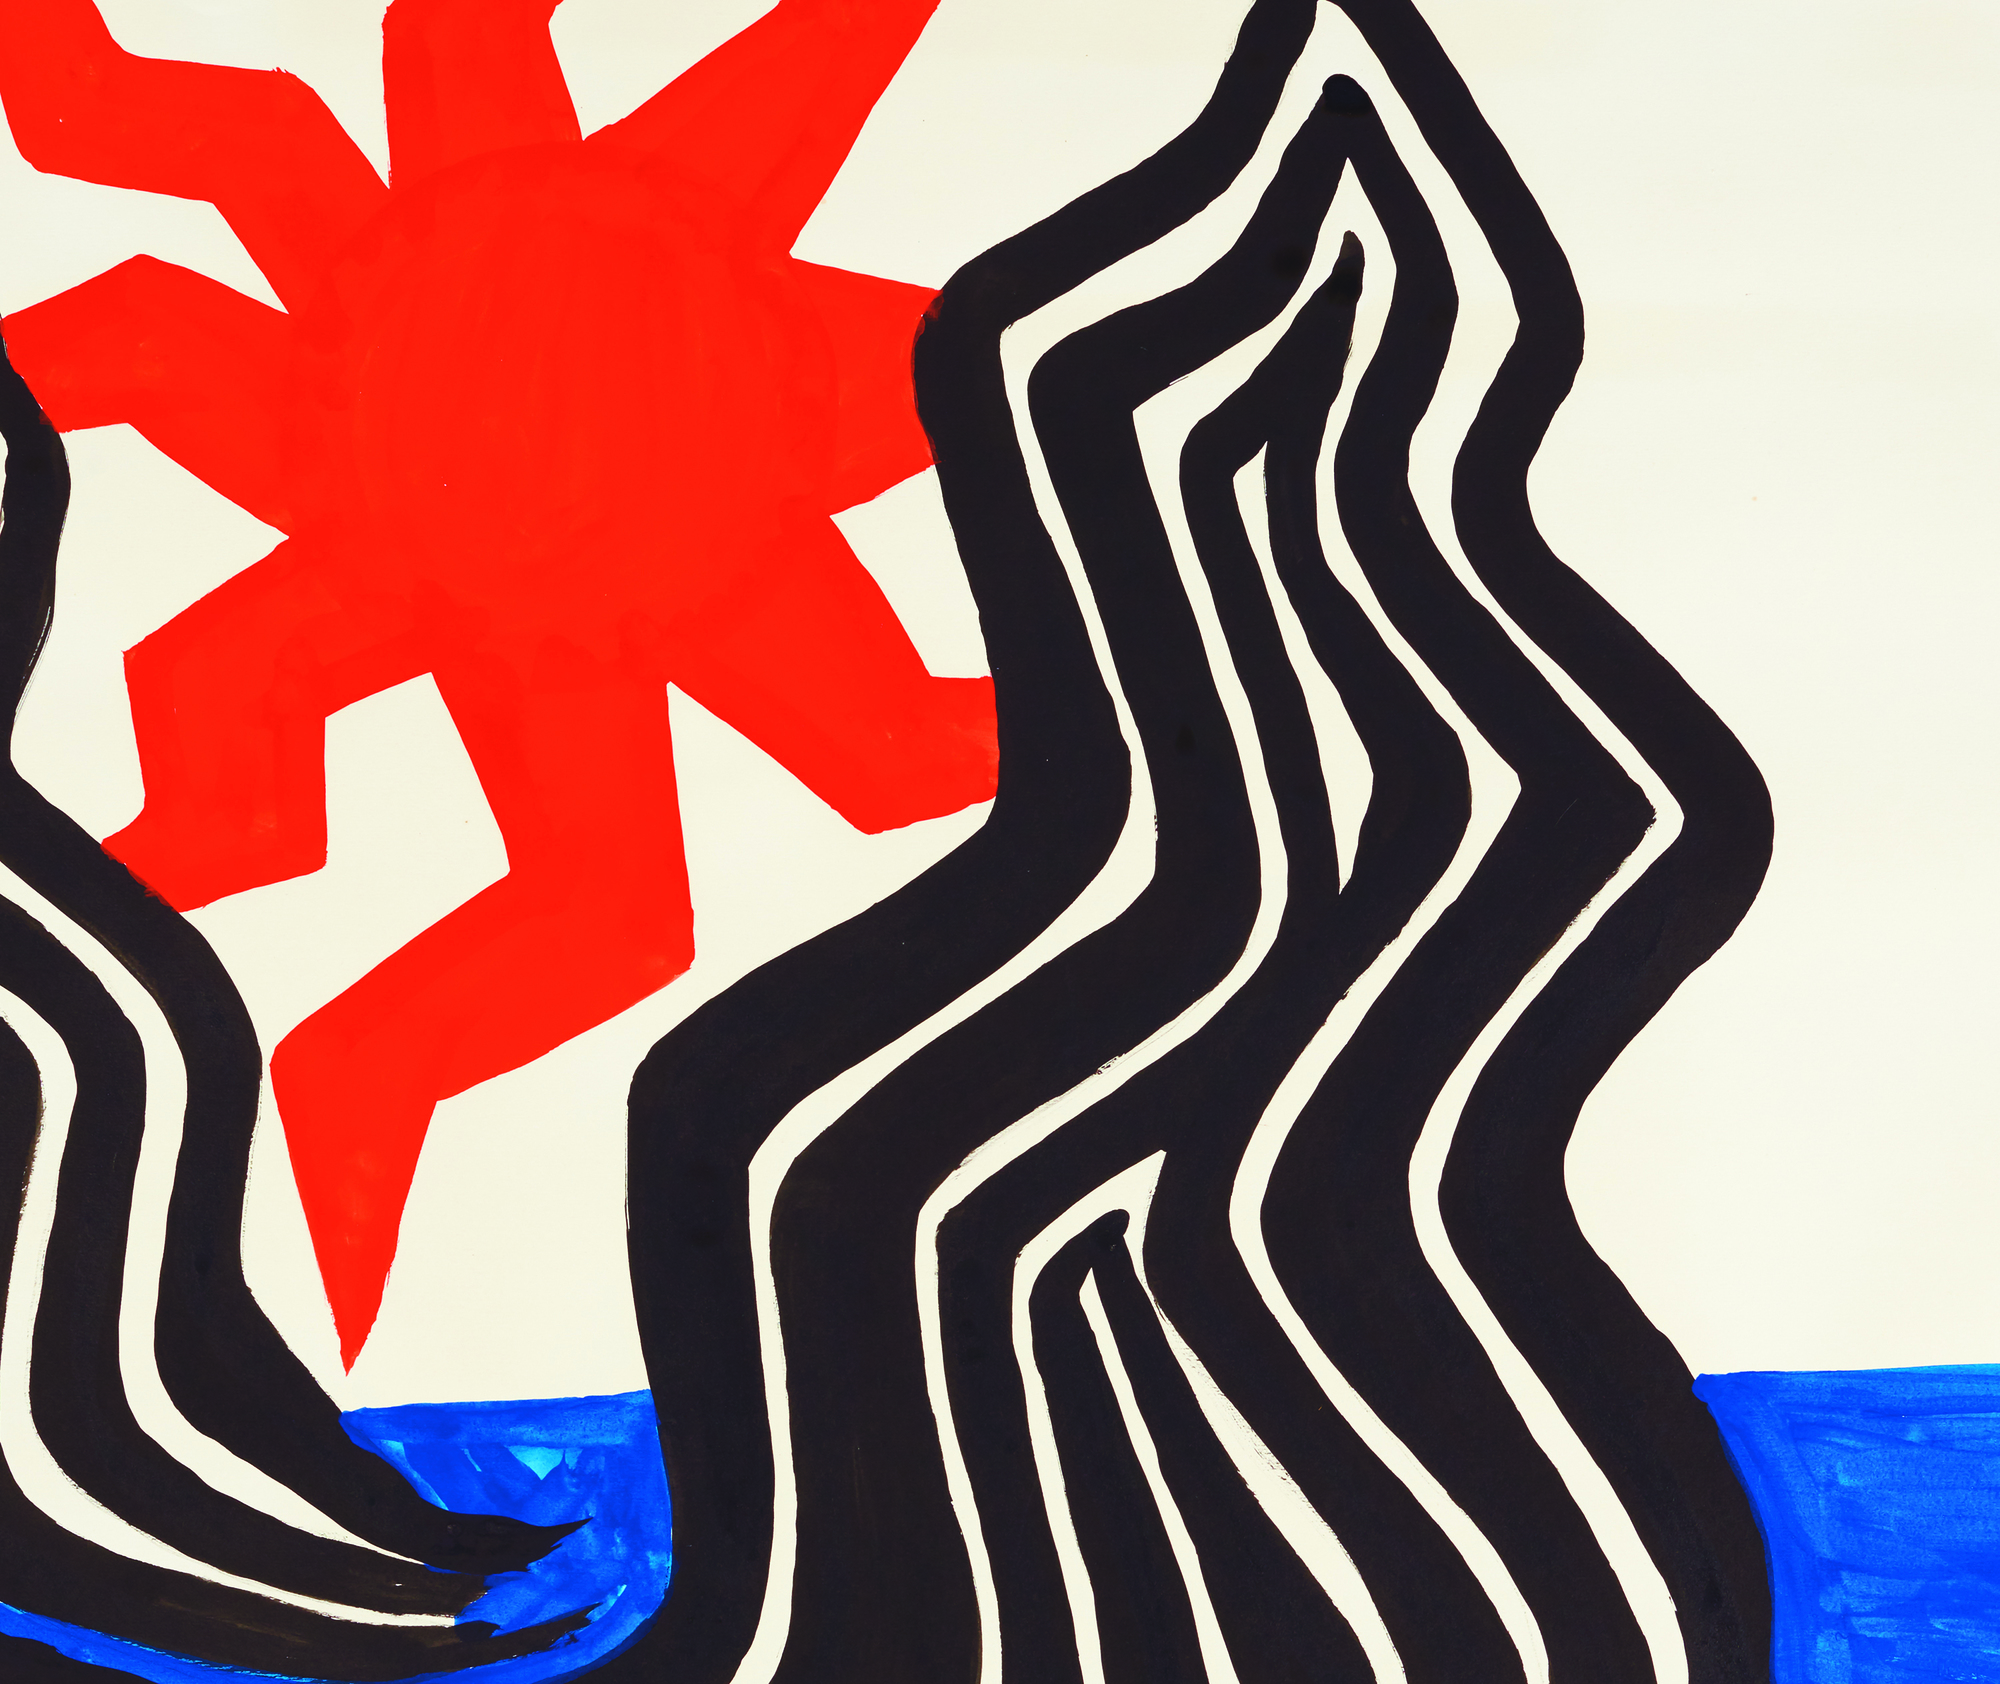 Zigzag, Sun, and Crags, painted in 1972, recalls the early morning hour of June 9, 1922 when the young seafaring adventurer Sandy (Alexander) Calder was awakened on the deck of the H. F. Alexander by the intense beams of tropical sunlight that burst across the bow. He stood, squinting against the glare, then turned his head to the west and felt a sudden rush of sensations that brought to him a cosmic resonance he had never felt before. <br><br>“It was early one morning on a calm sea, off Guatemala, when over my couch — a coil of rope — I saw the beginning of a fiery red sunrise on one side and the moon looking like a silver coin on the other. Of the whole trip this impressed me most of all; it left me with a lasting sensation of the solar system.” <br><br>Zignag, Sun, and Crags is not a simple memento of that experience. It is an exhilarating work that celebrates Calder’s inimitable way of imparting the wonder of the natural world by amplifying our experience of it. If, as he might wish, it brings a sense of interconnectedness and belonging as it did to him along the coast of Guatemala as a young Merchant Marine, so much the better.